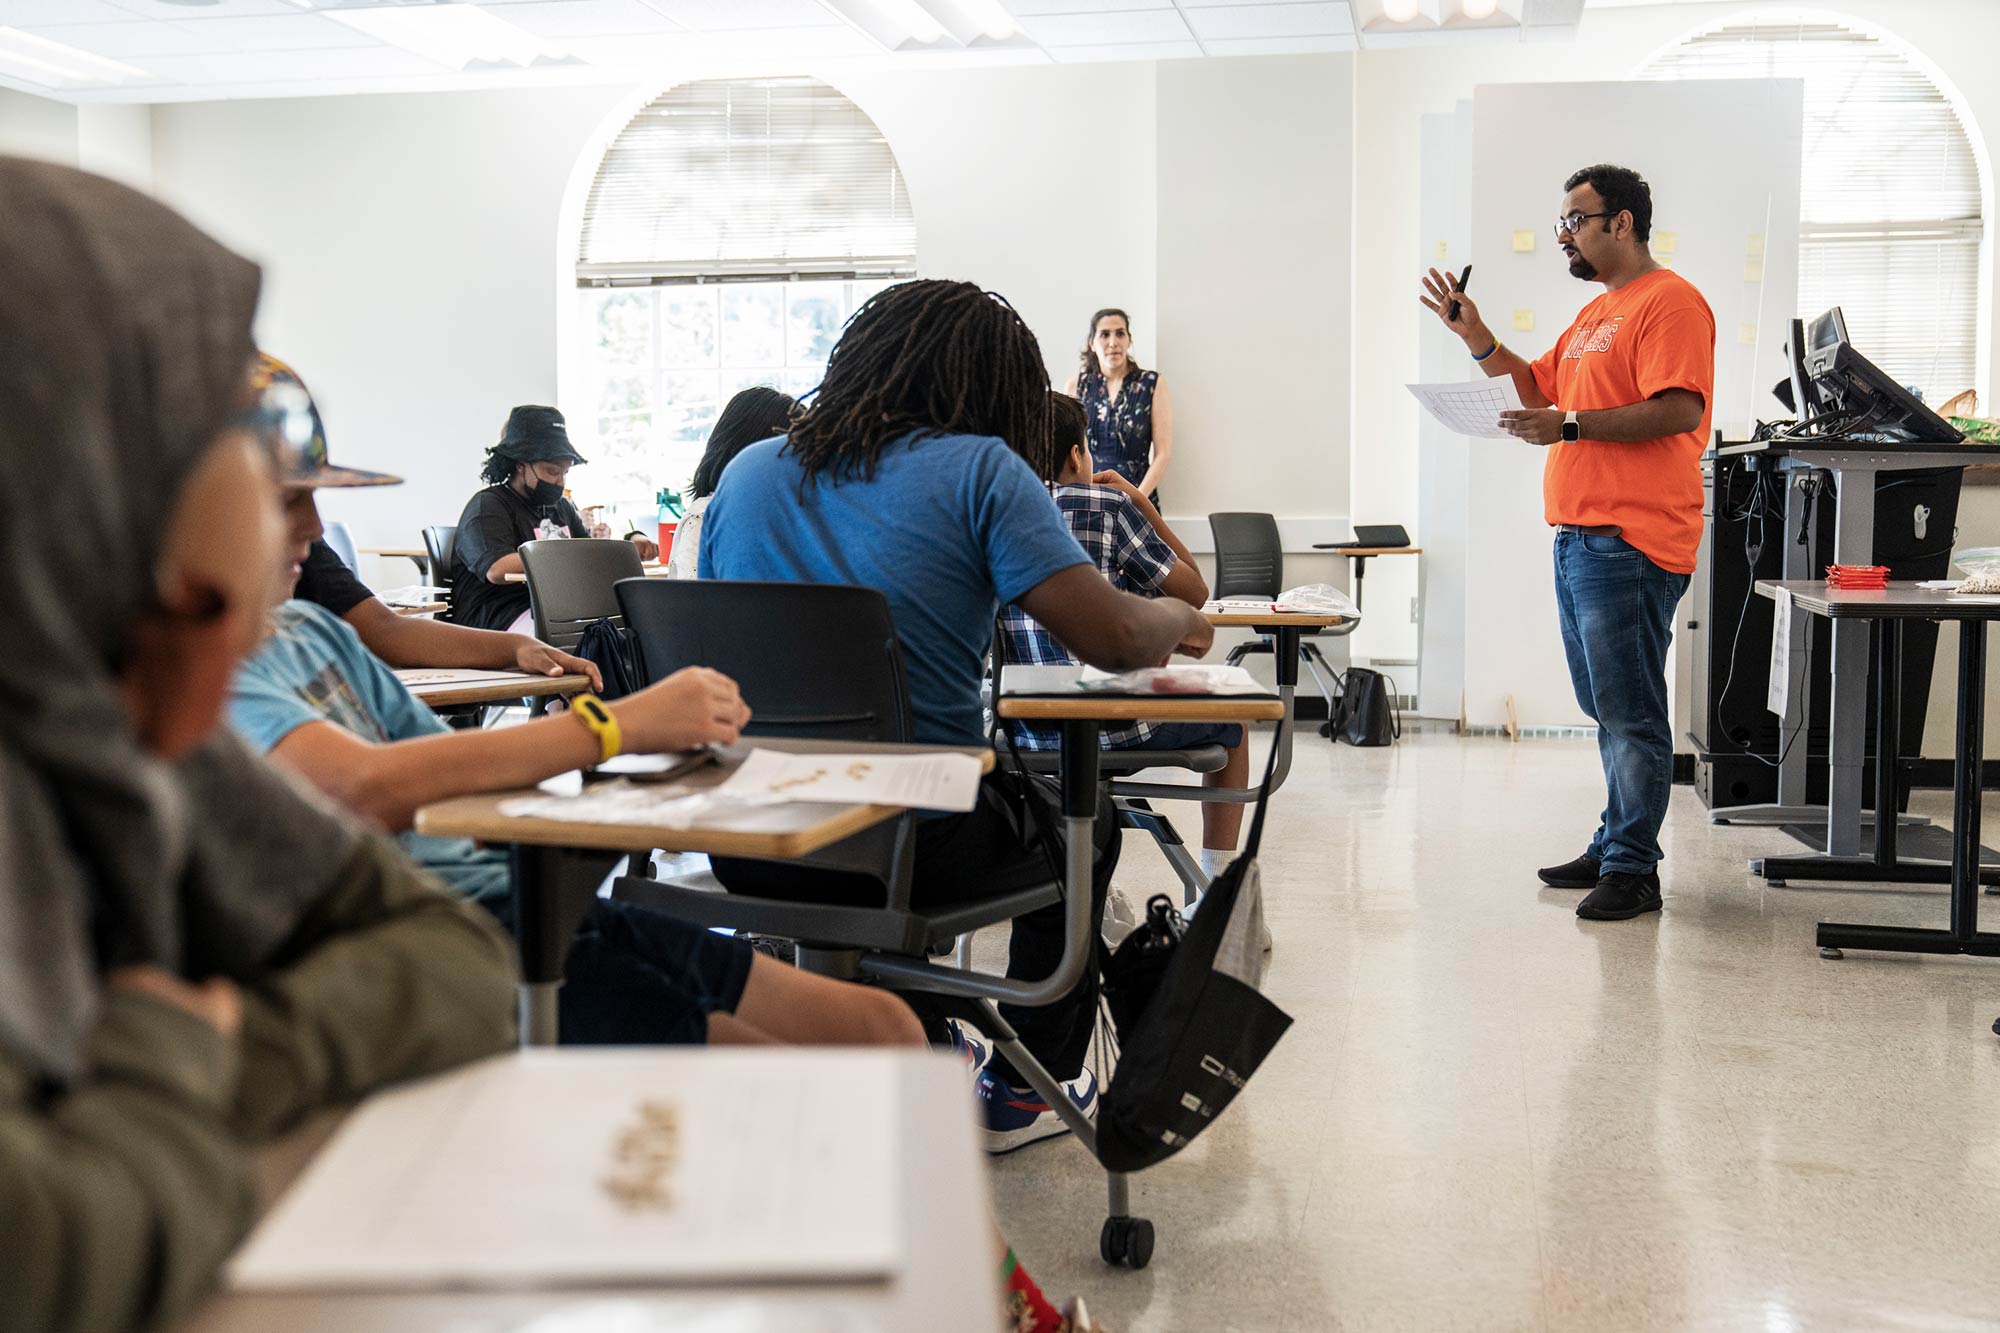 A man in an orange shirt talks to students seated at desks